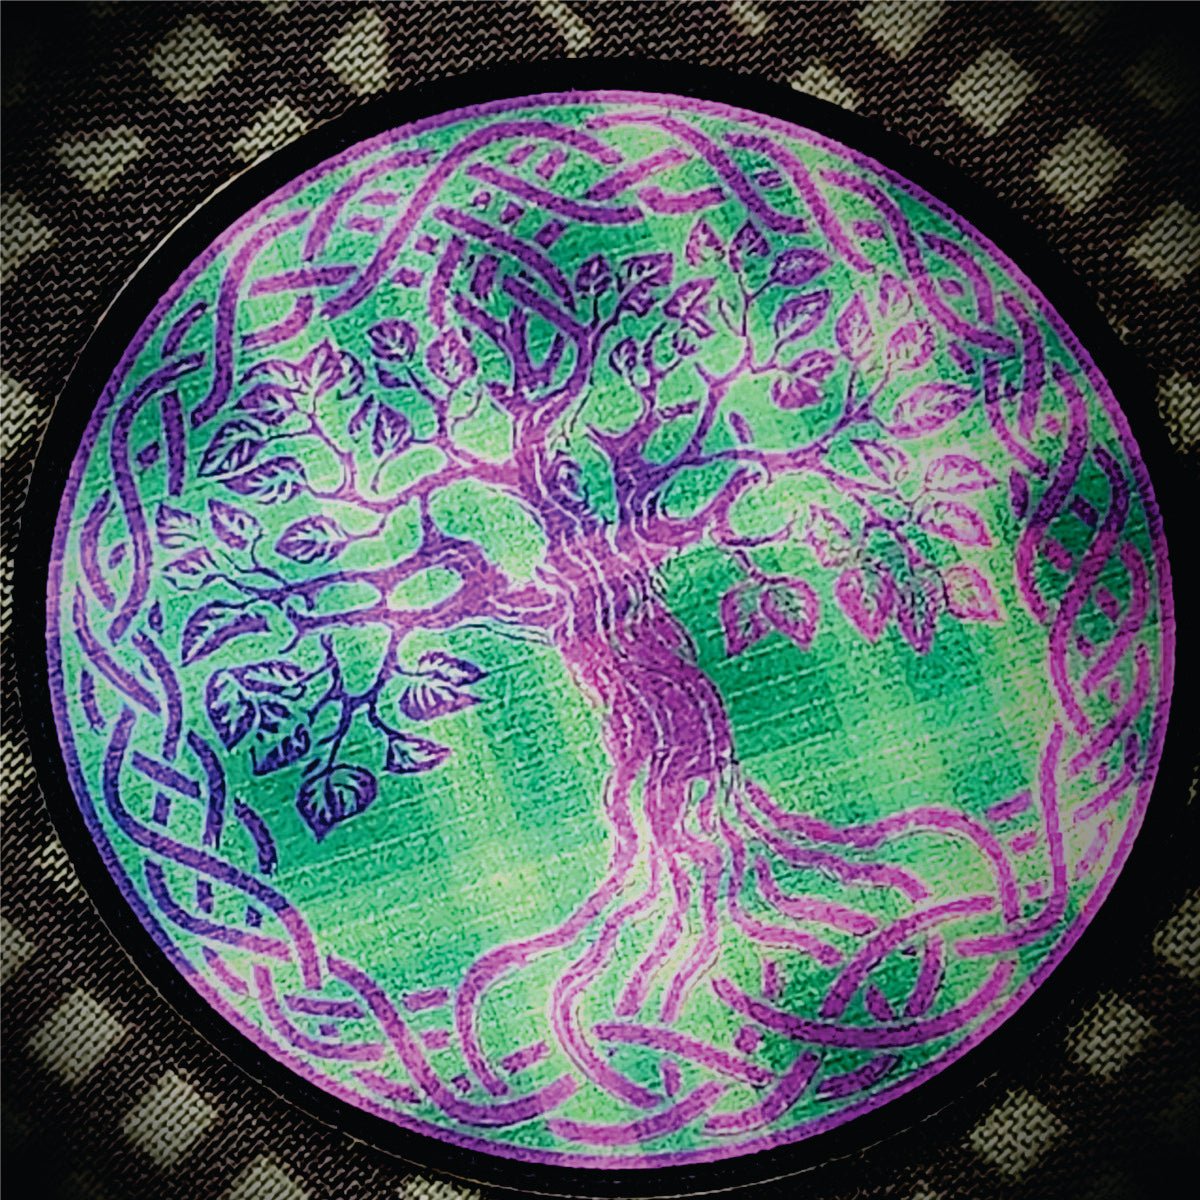 Holographic Celtic Knot Tree of life Printed Vinyl Patch - 2.85" Patch